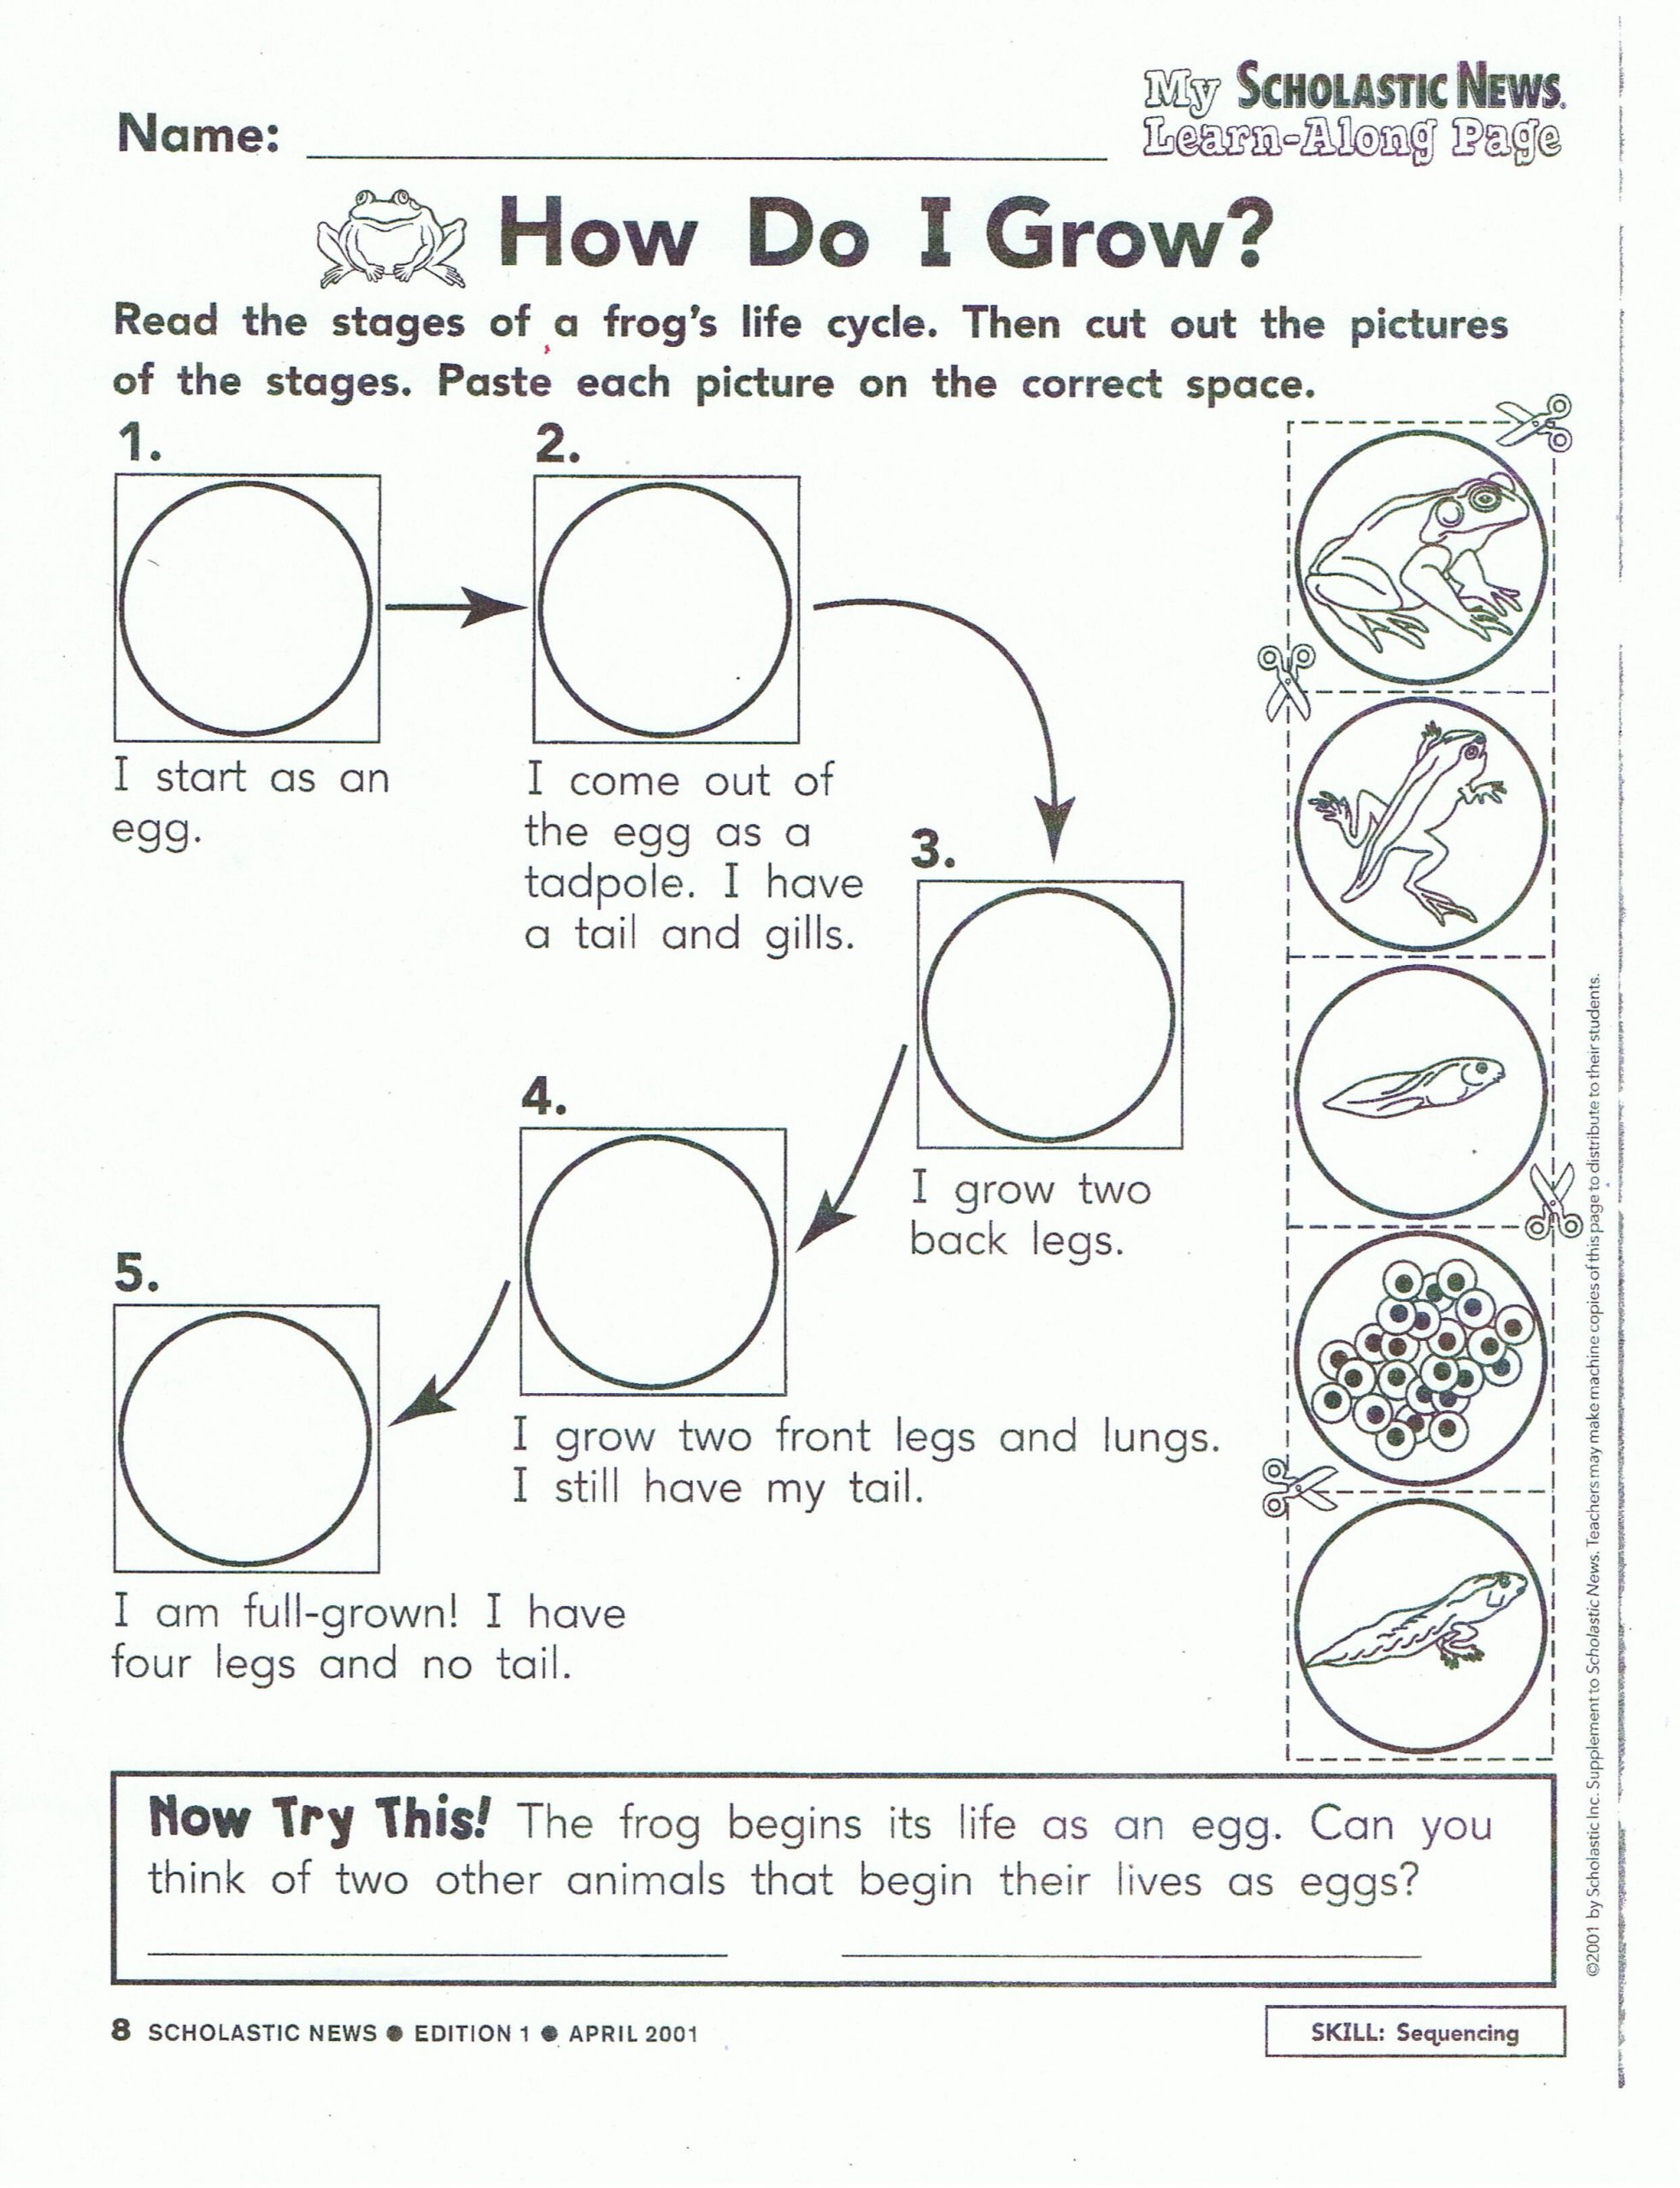 Frog Life Cycle Worksheet toad Life Cycle Image Search Results